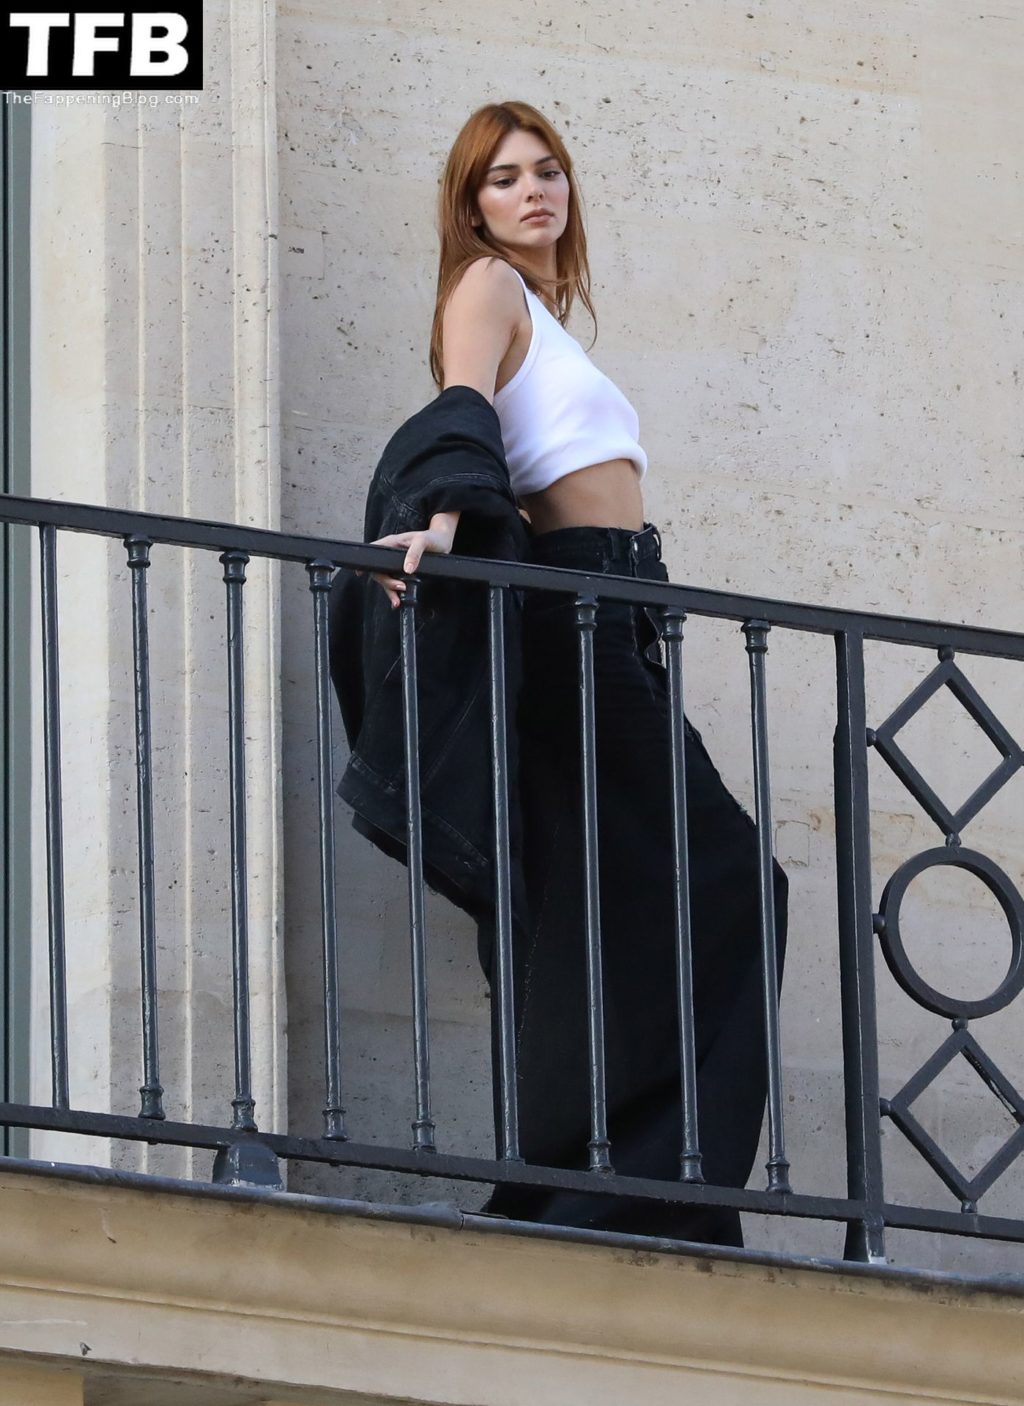 Kendall Jenner Braless The Fappening Blog 75 1024x1406 - Braless Kendall Jenner Poses in Paris (141 Photos)